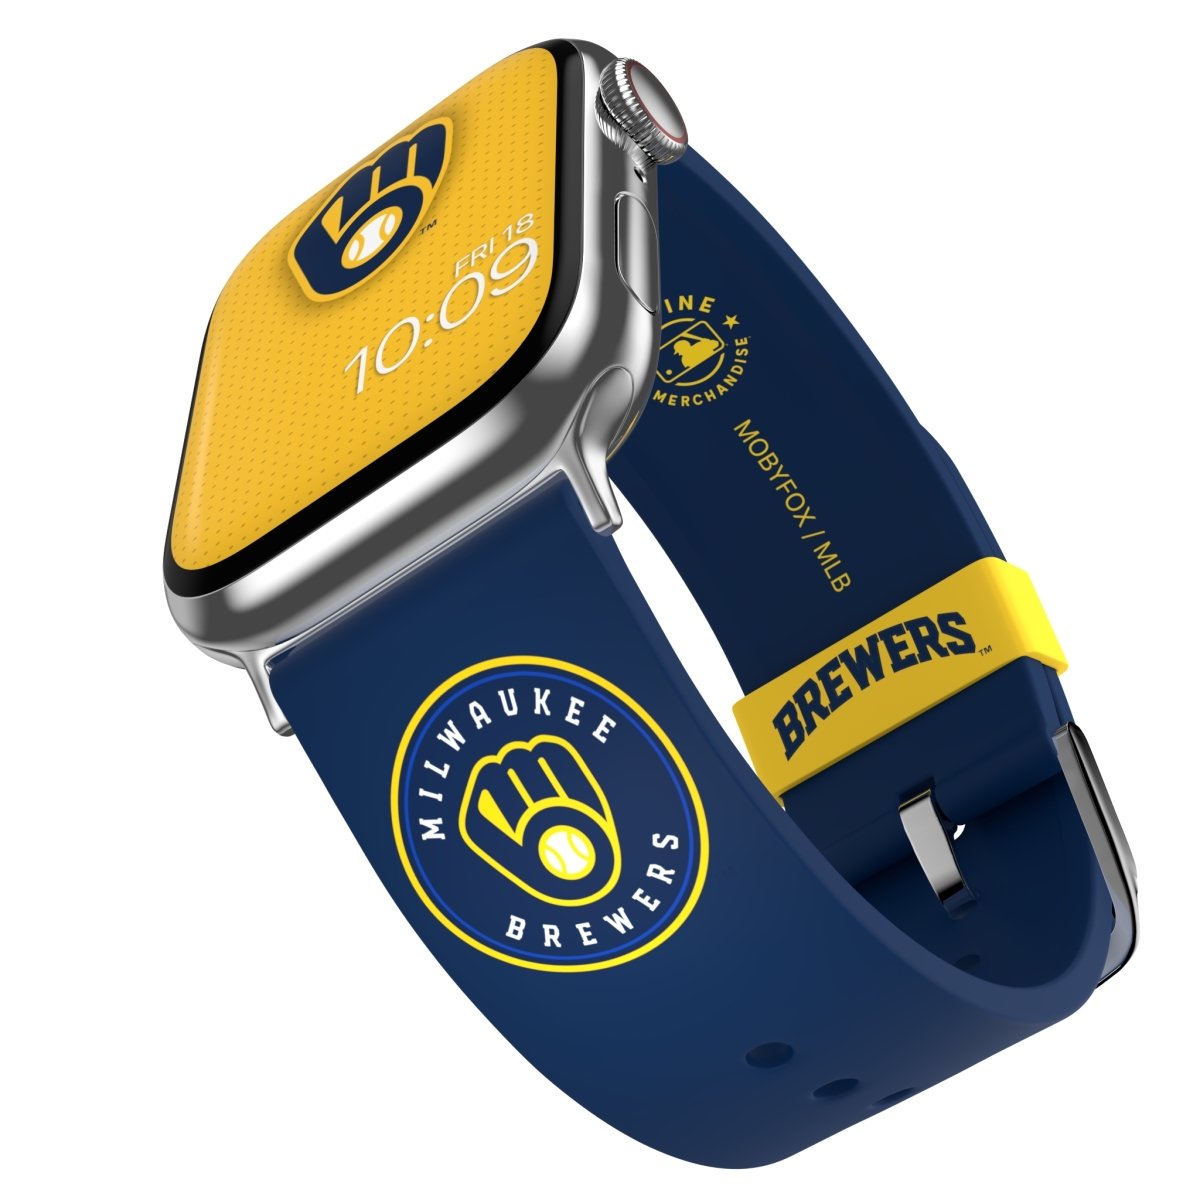 MLB - Milwaukee Brewers Apple Watch Band | Officially Licensed | MobyFox